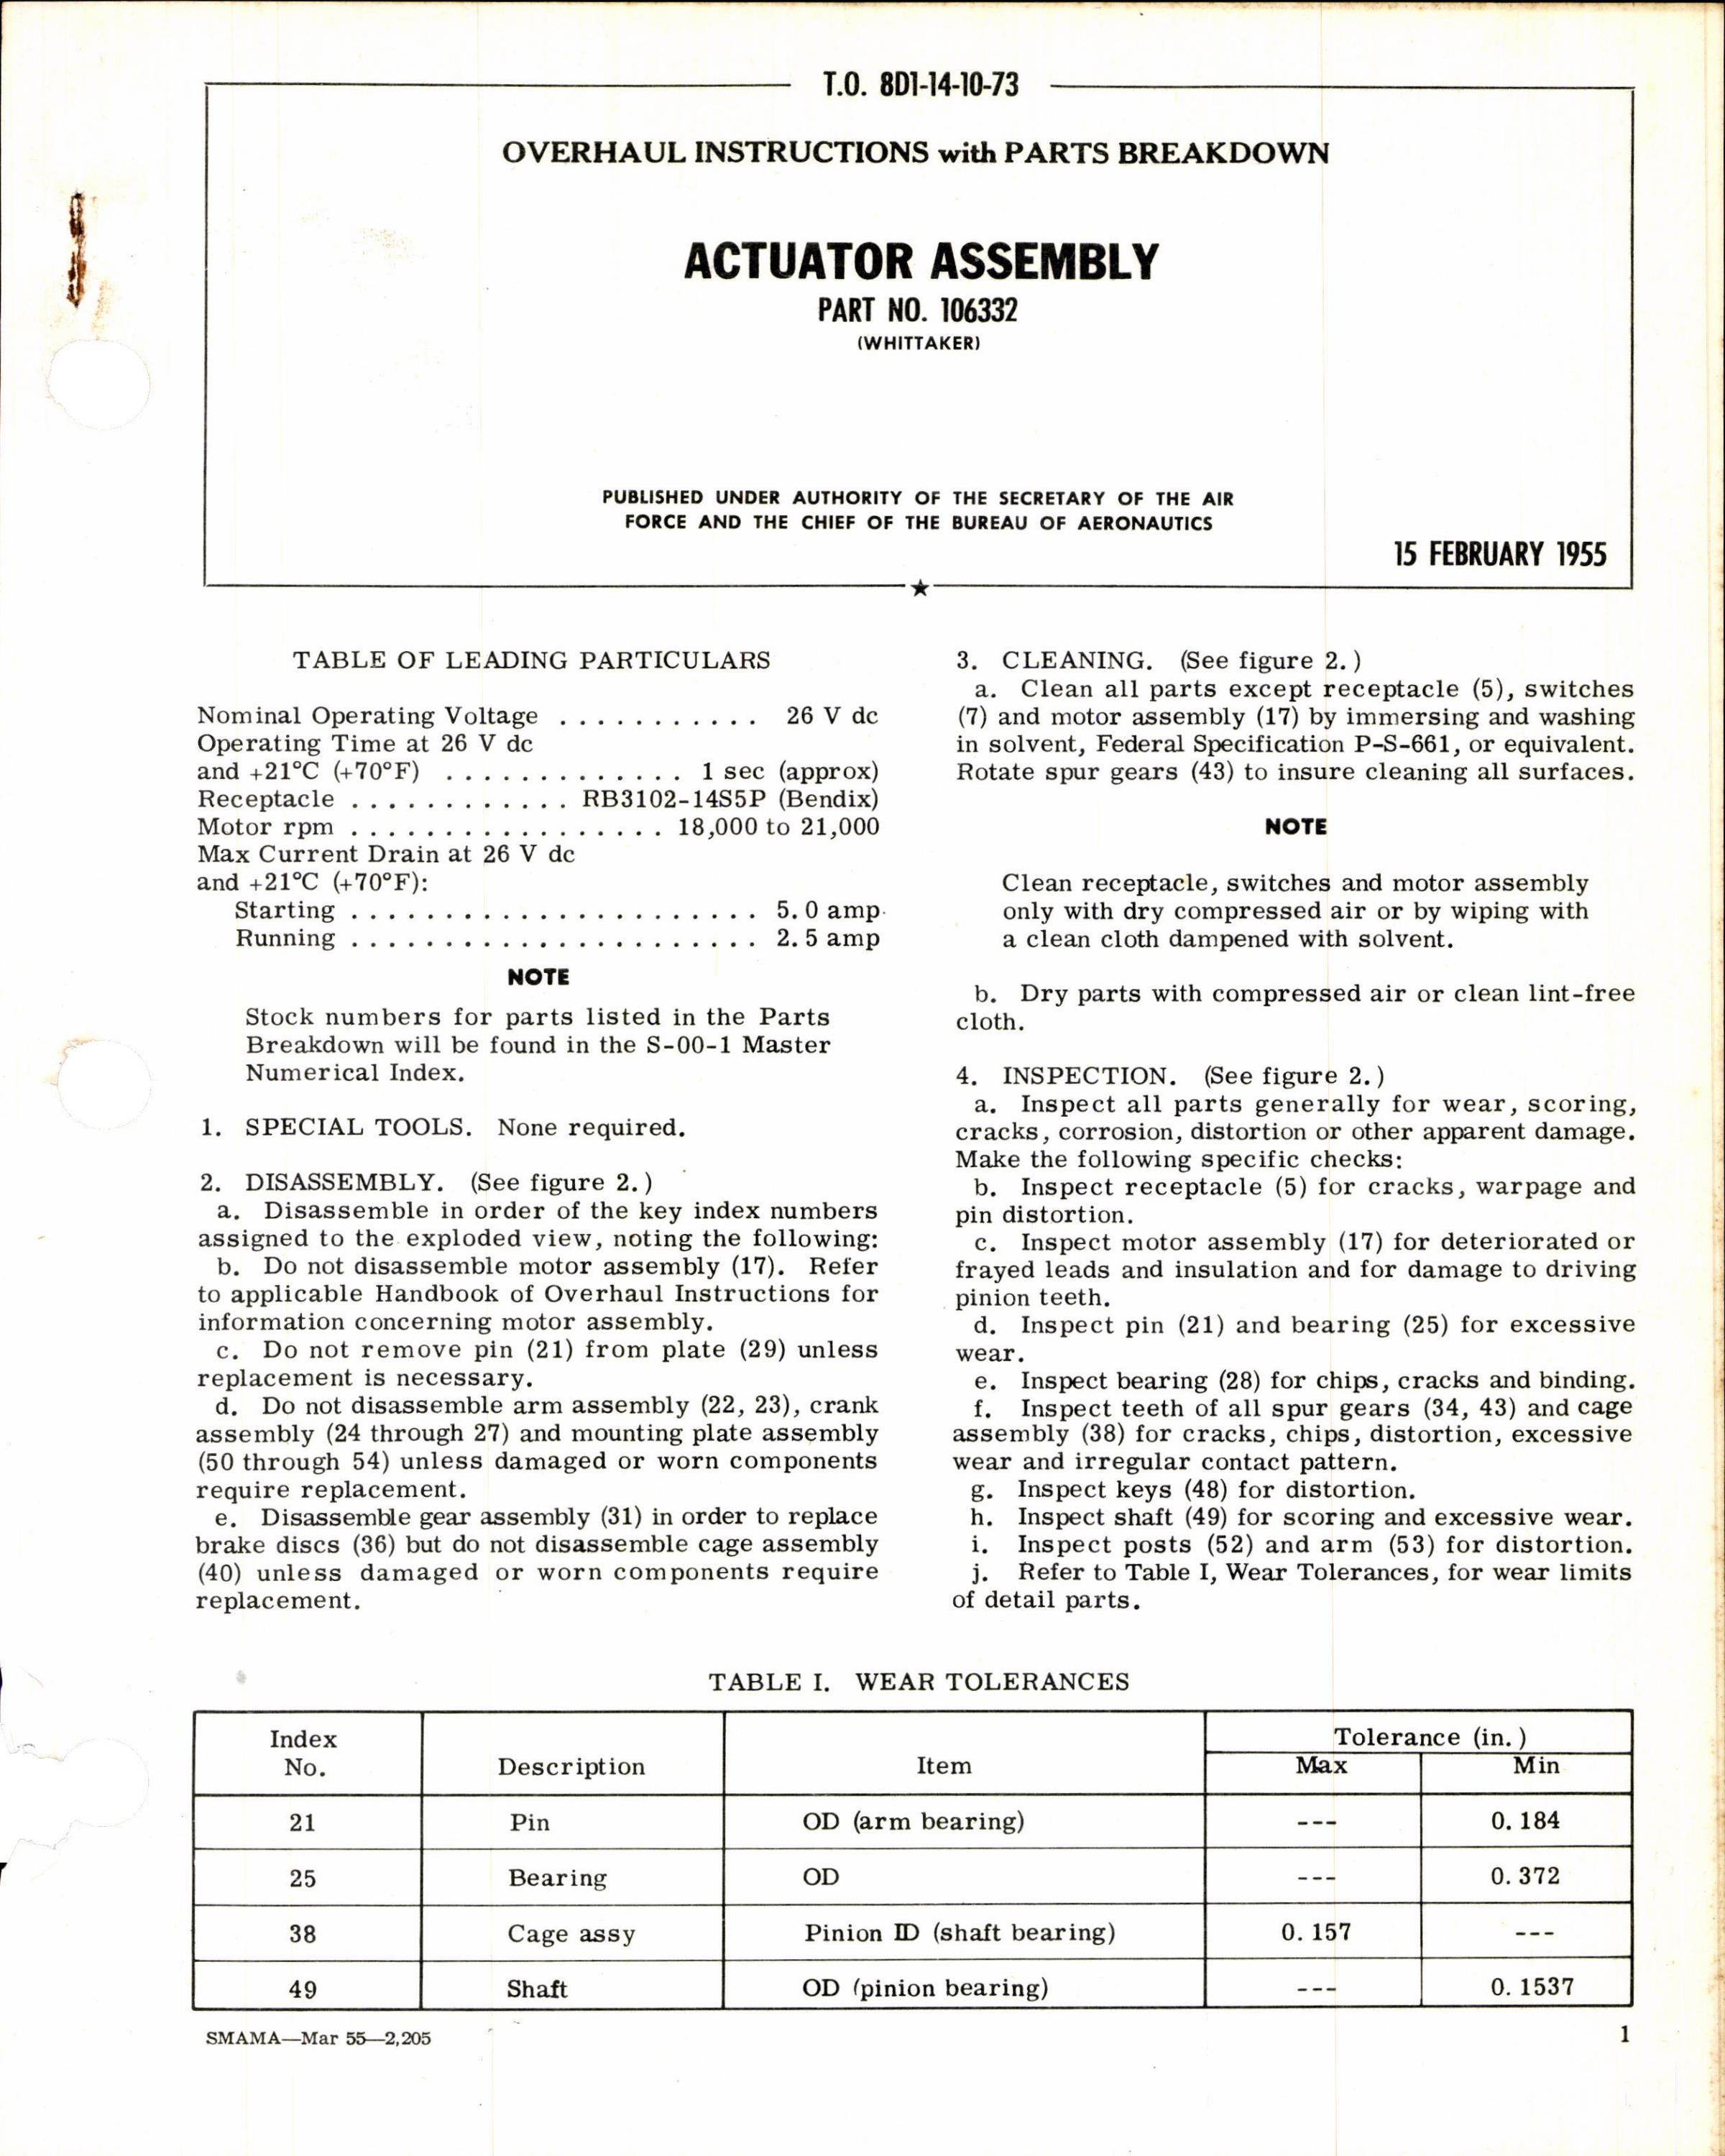 Sample page 1 from AirCorps Library document: Instructions w Parts Breakdown for Actuator Assembly Part 106332